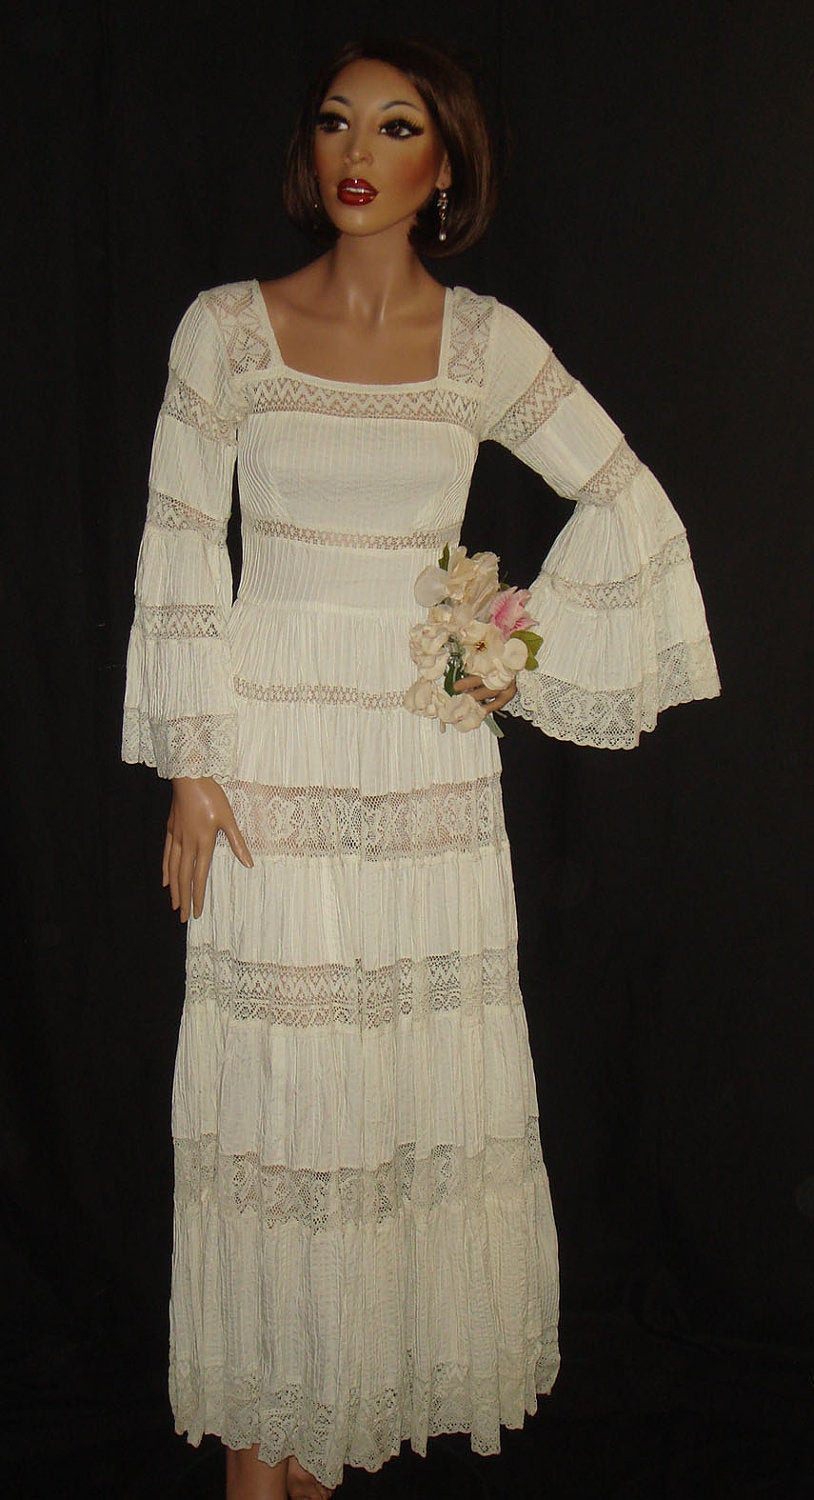 Mexican Wedding Dresses
 Vintage 1960s White Mexican Wedding Dress with sheer lace and